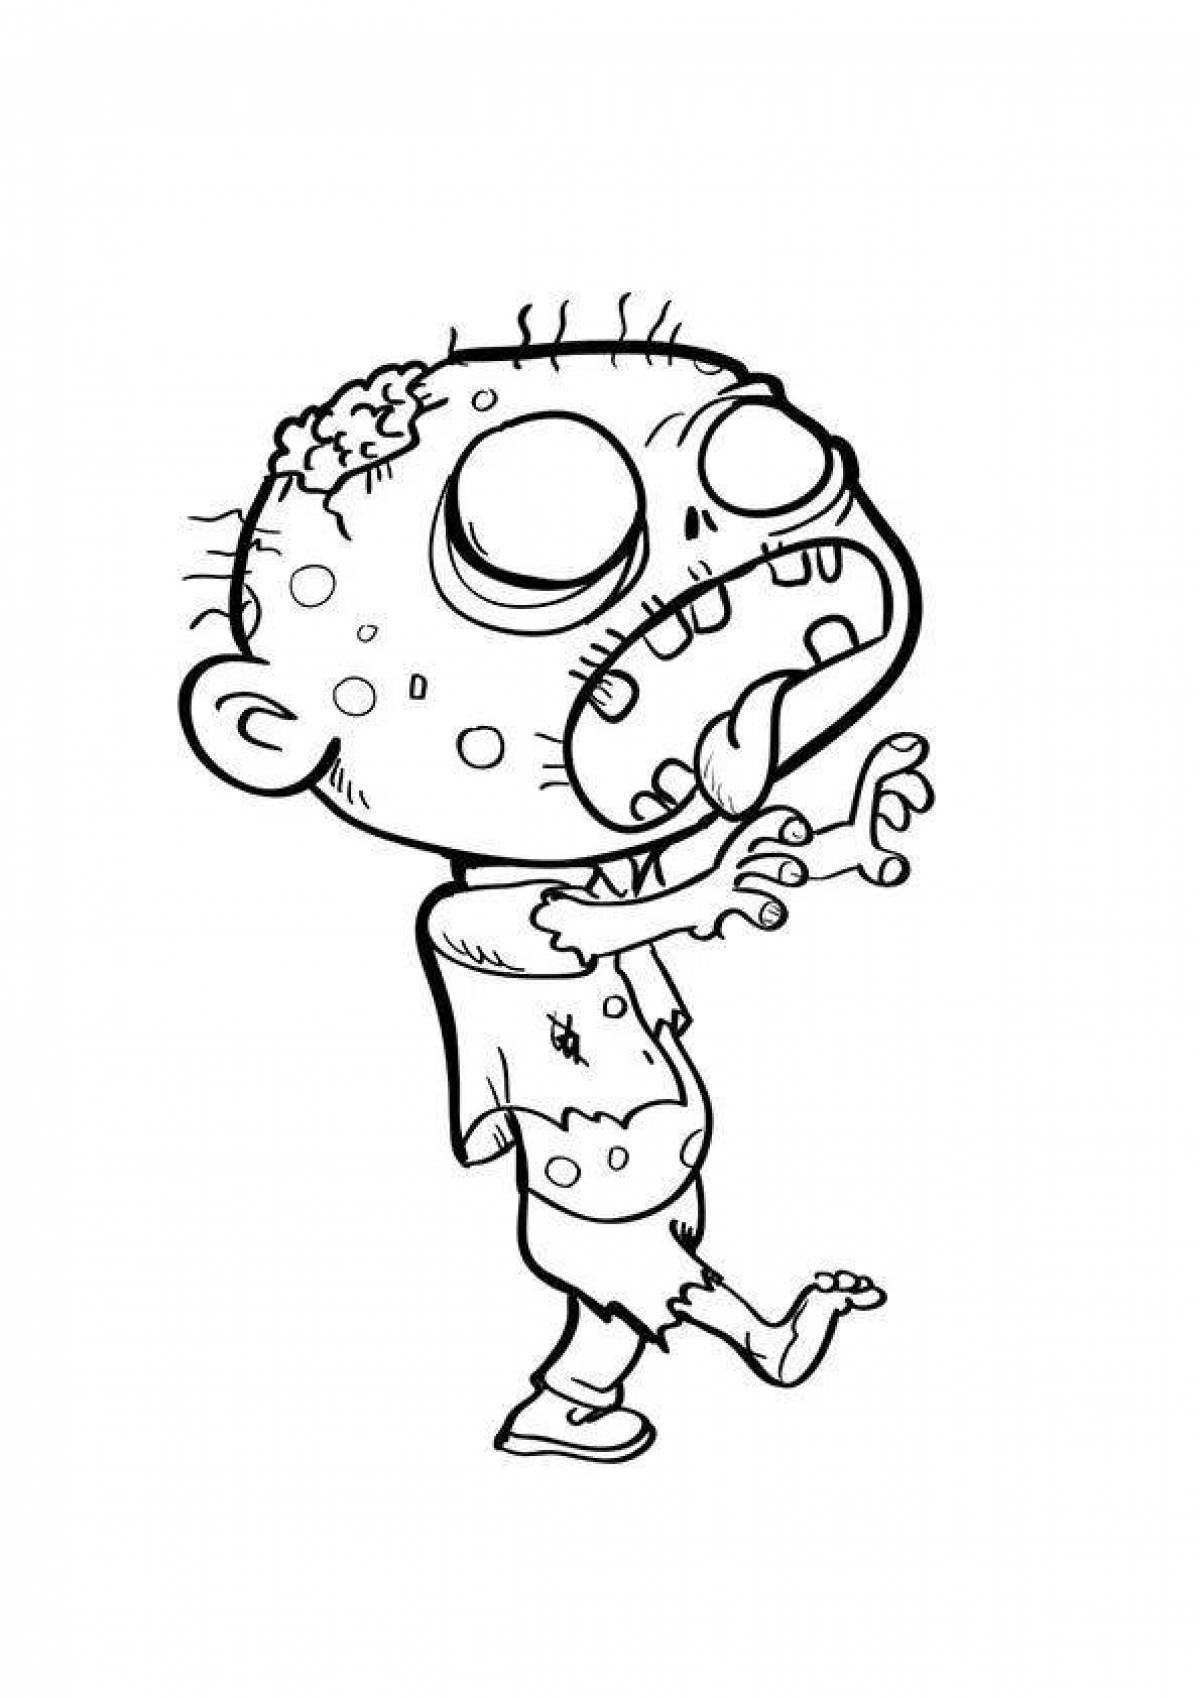 Disgusting zombie coloring pages for kids